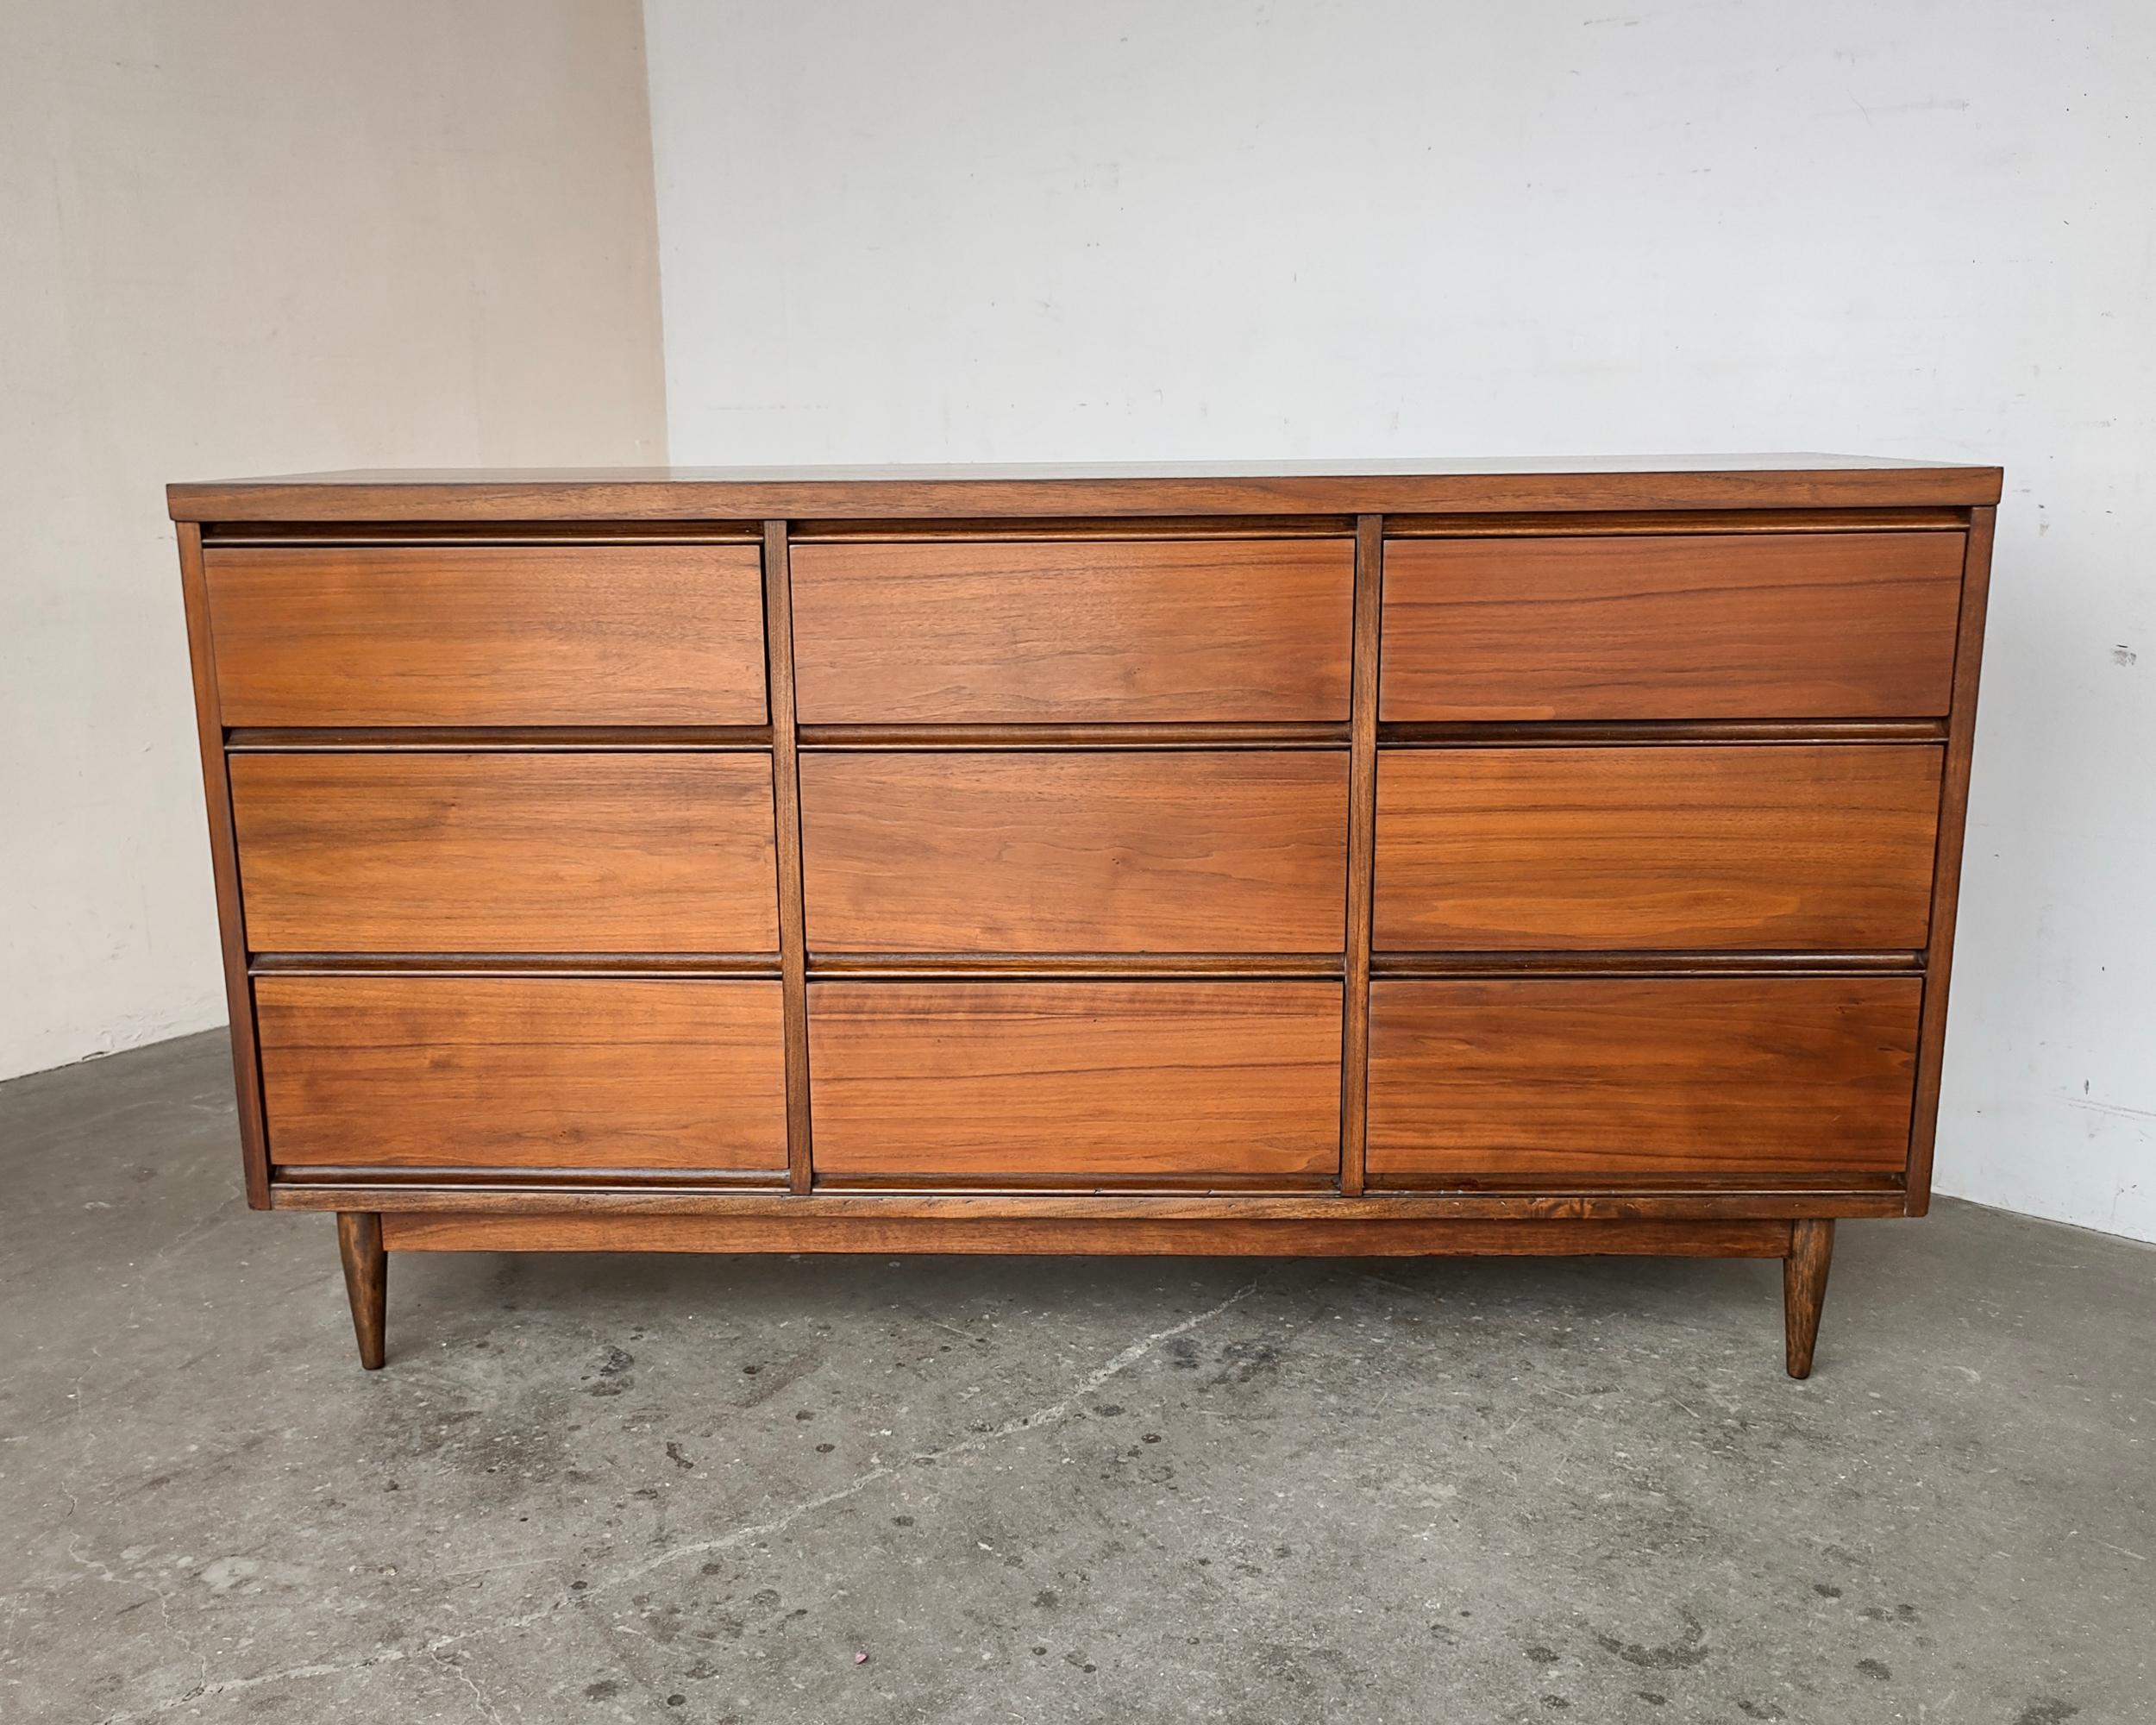 Professionally restored Mid-Century Modern nine-drawer walnut dresser circa 1960s. Classic minimal design featuring beautiful walnut wood grain covering entire body and tapered legs. Overall great condition - some light wear consistent with vintage